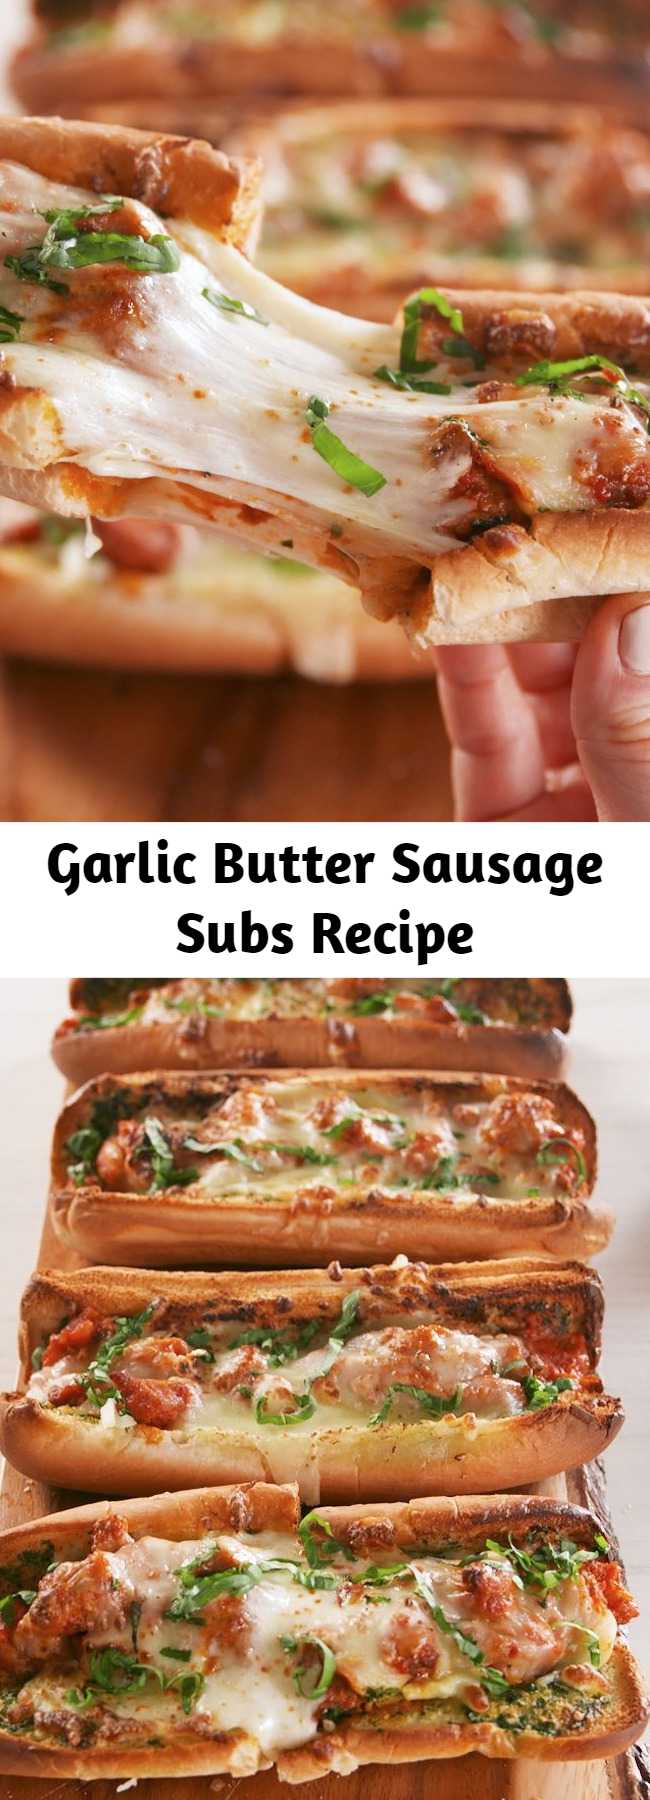 Garlic Butter Sausage Subs Recipe - Crunchy on the outside, soft on the inside. #easyrecipe #sausage #subs #sandwich #garlic